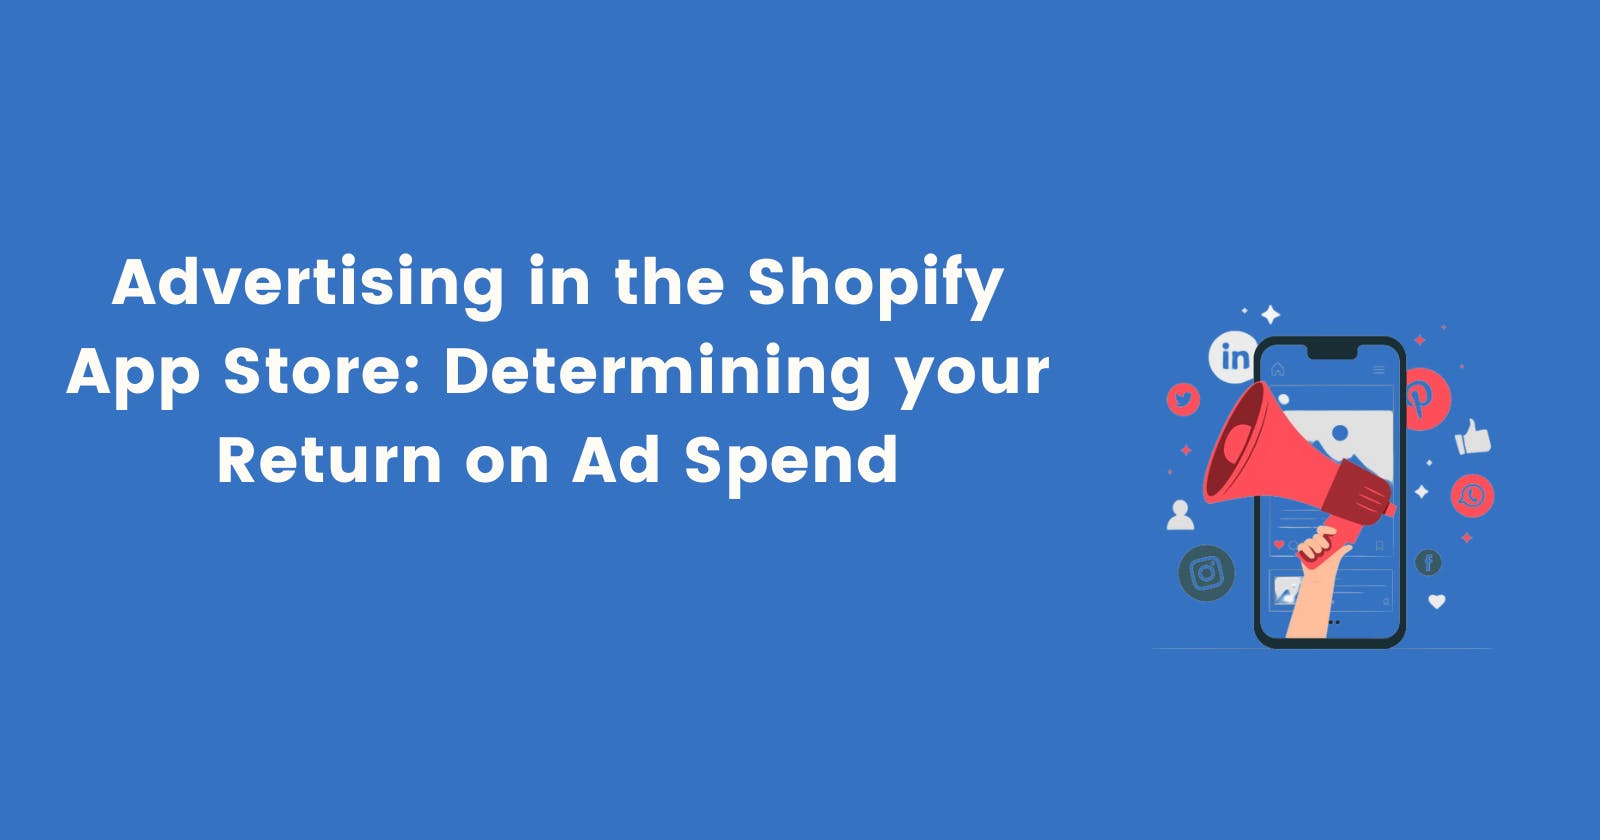 Advertising in the Shopify App Store: Determining your Return on Ad Spend